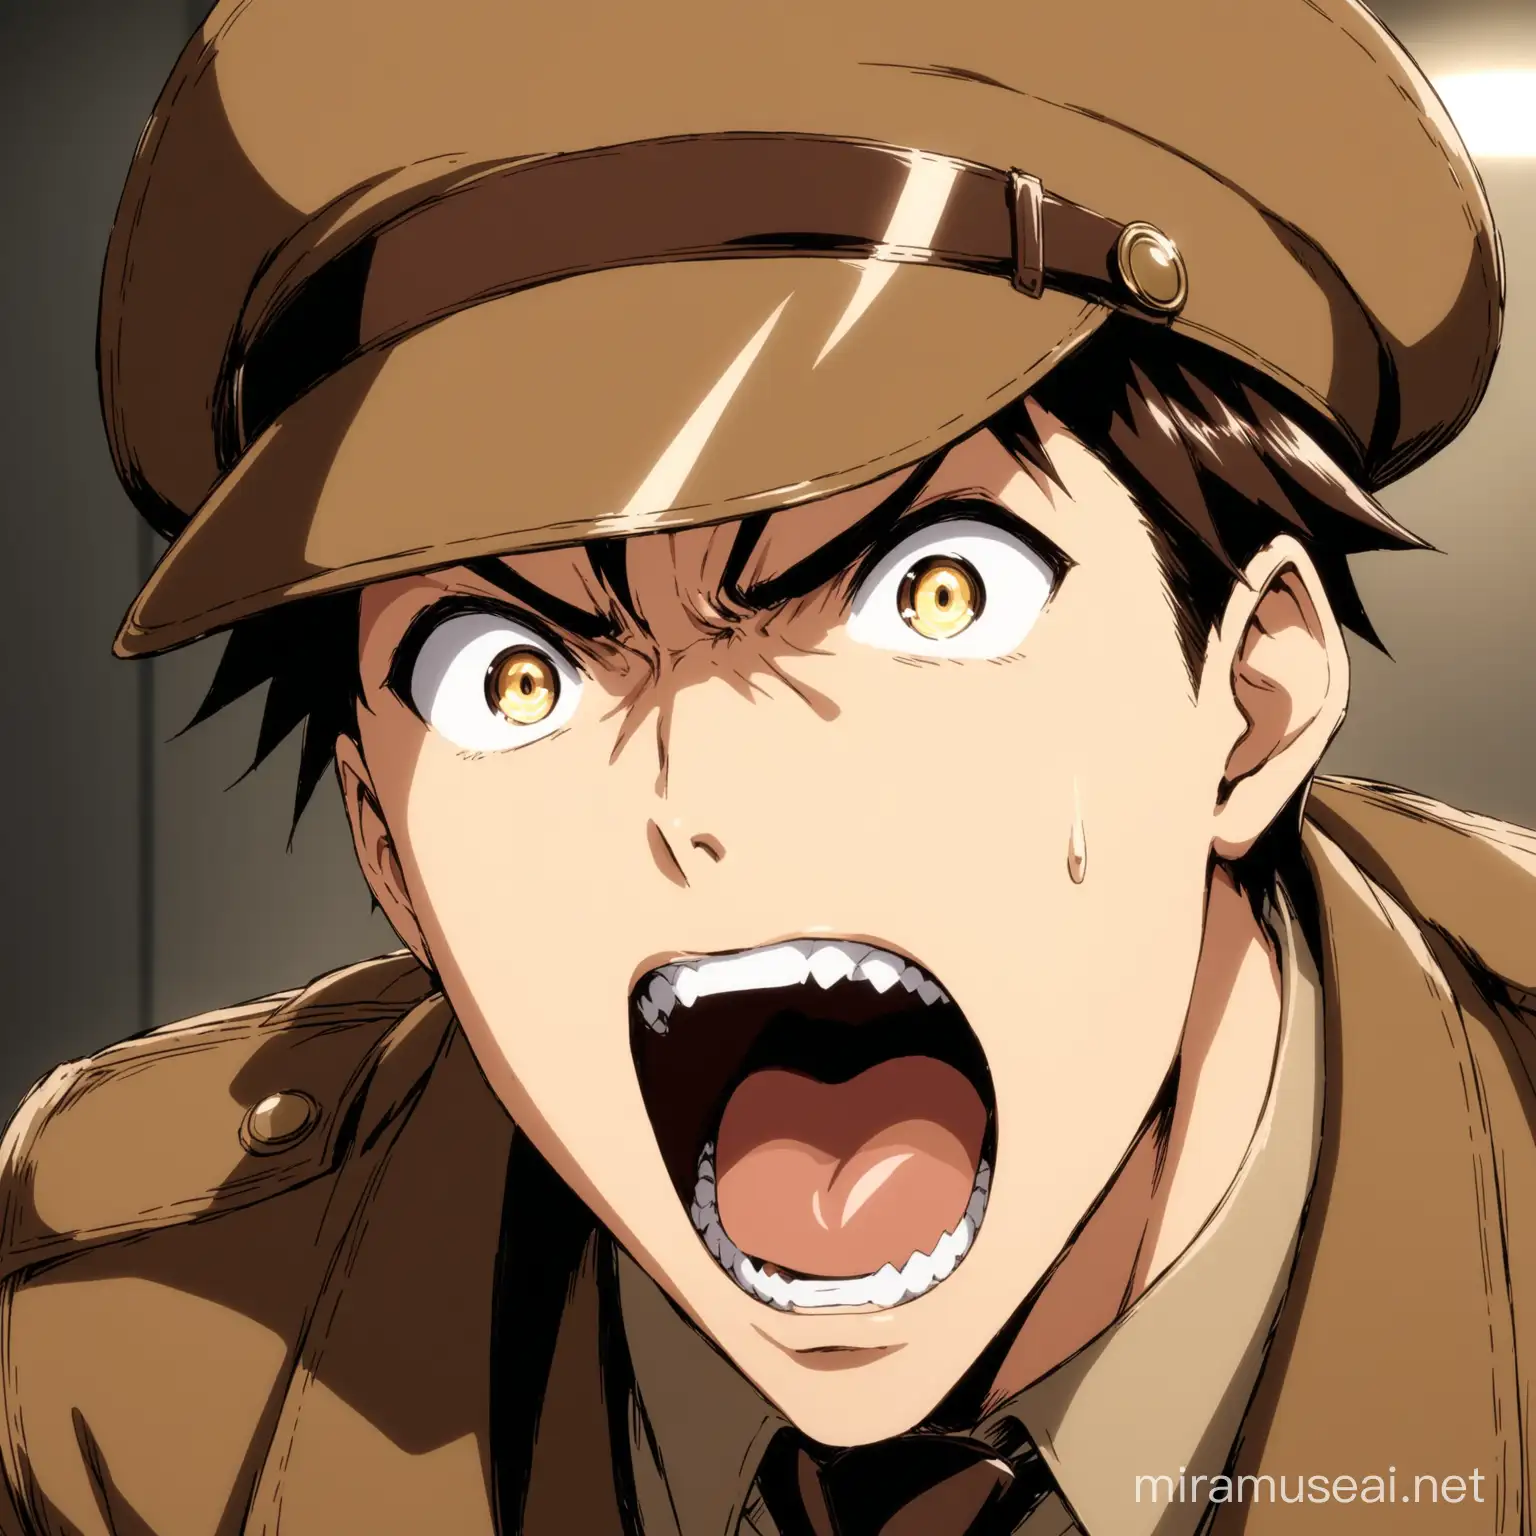 Anime Detective in Brown Attire Screaming Loudly